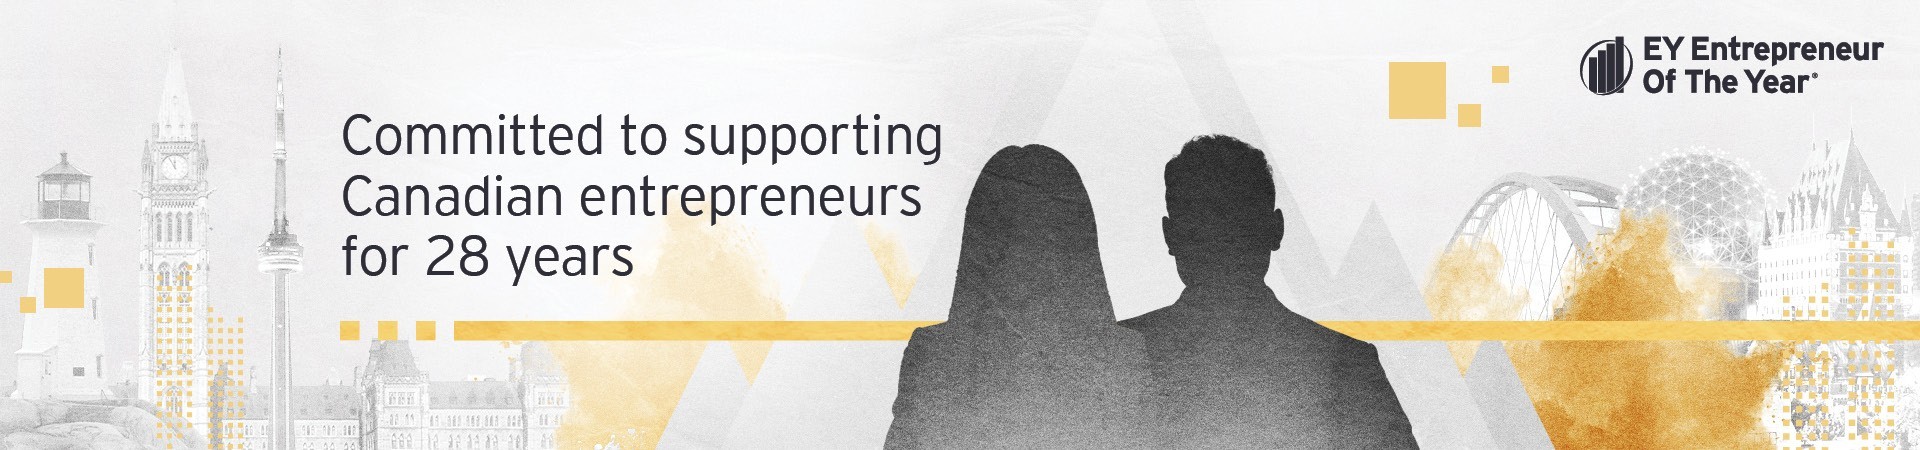 Committed to supporting Canadian entrepreneurs for 28 years